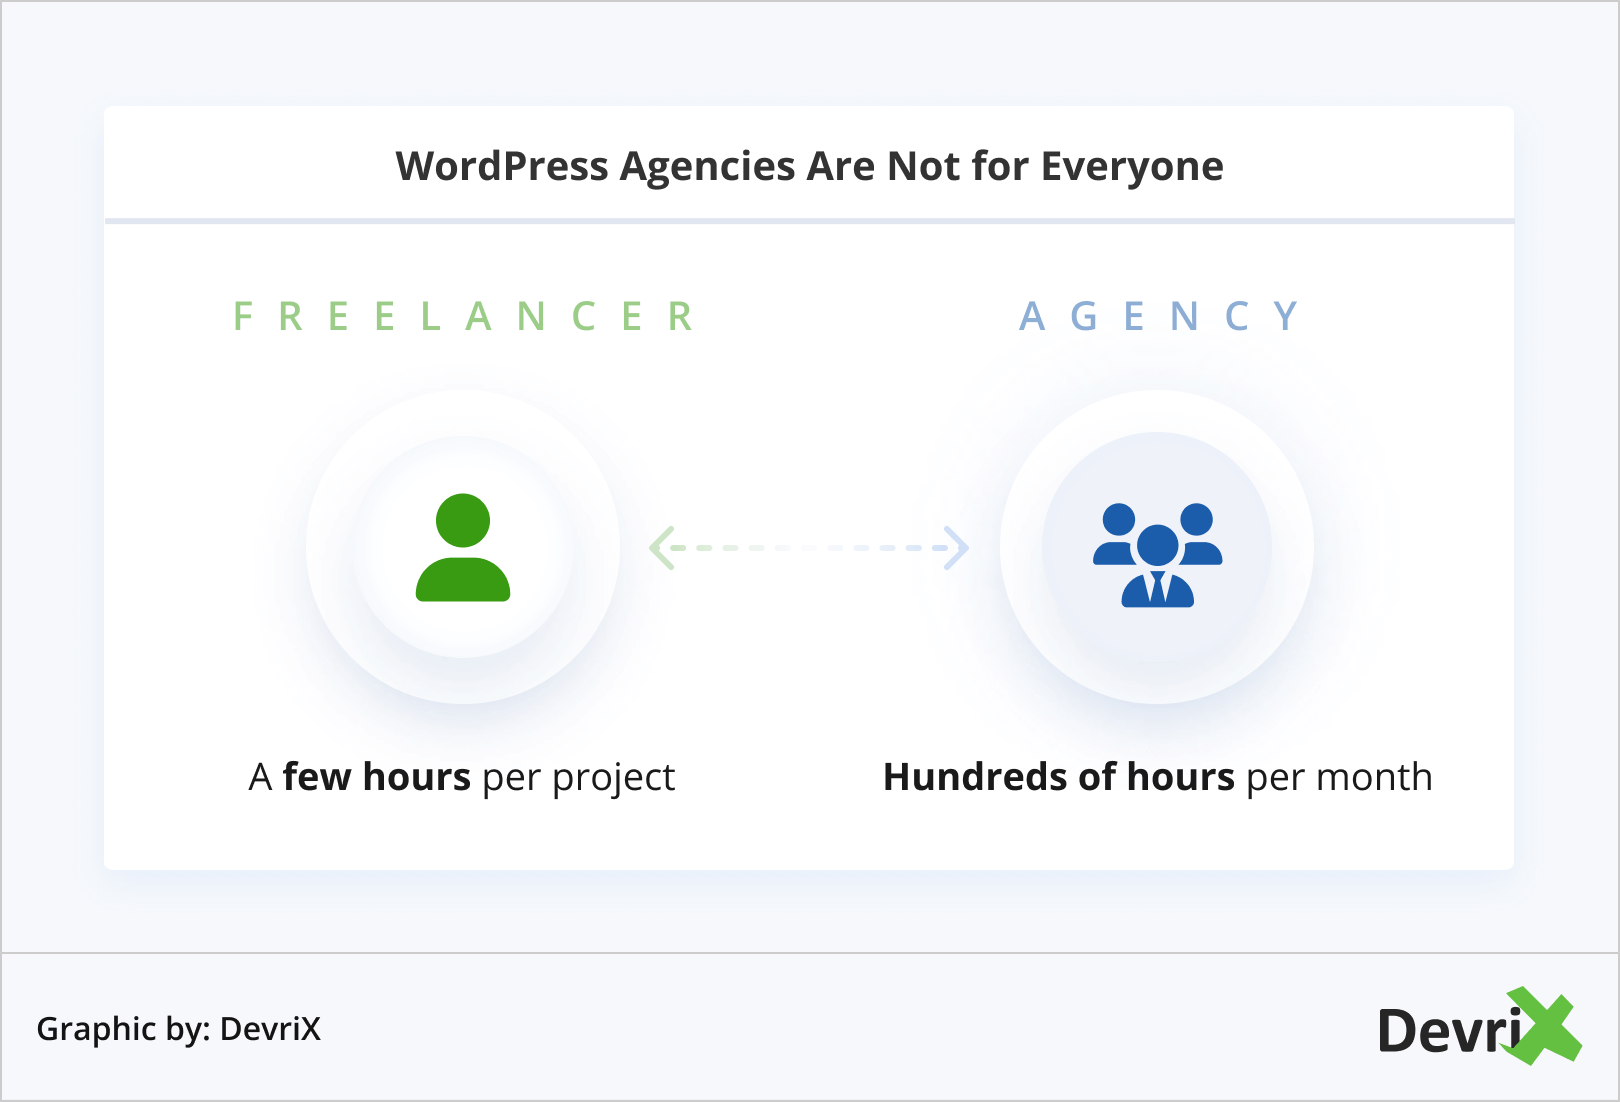 WordPress Agencies Are Not for Everyone